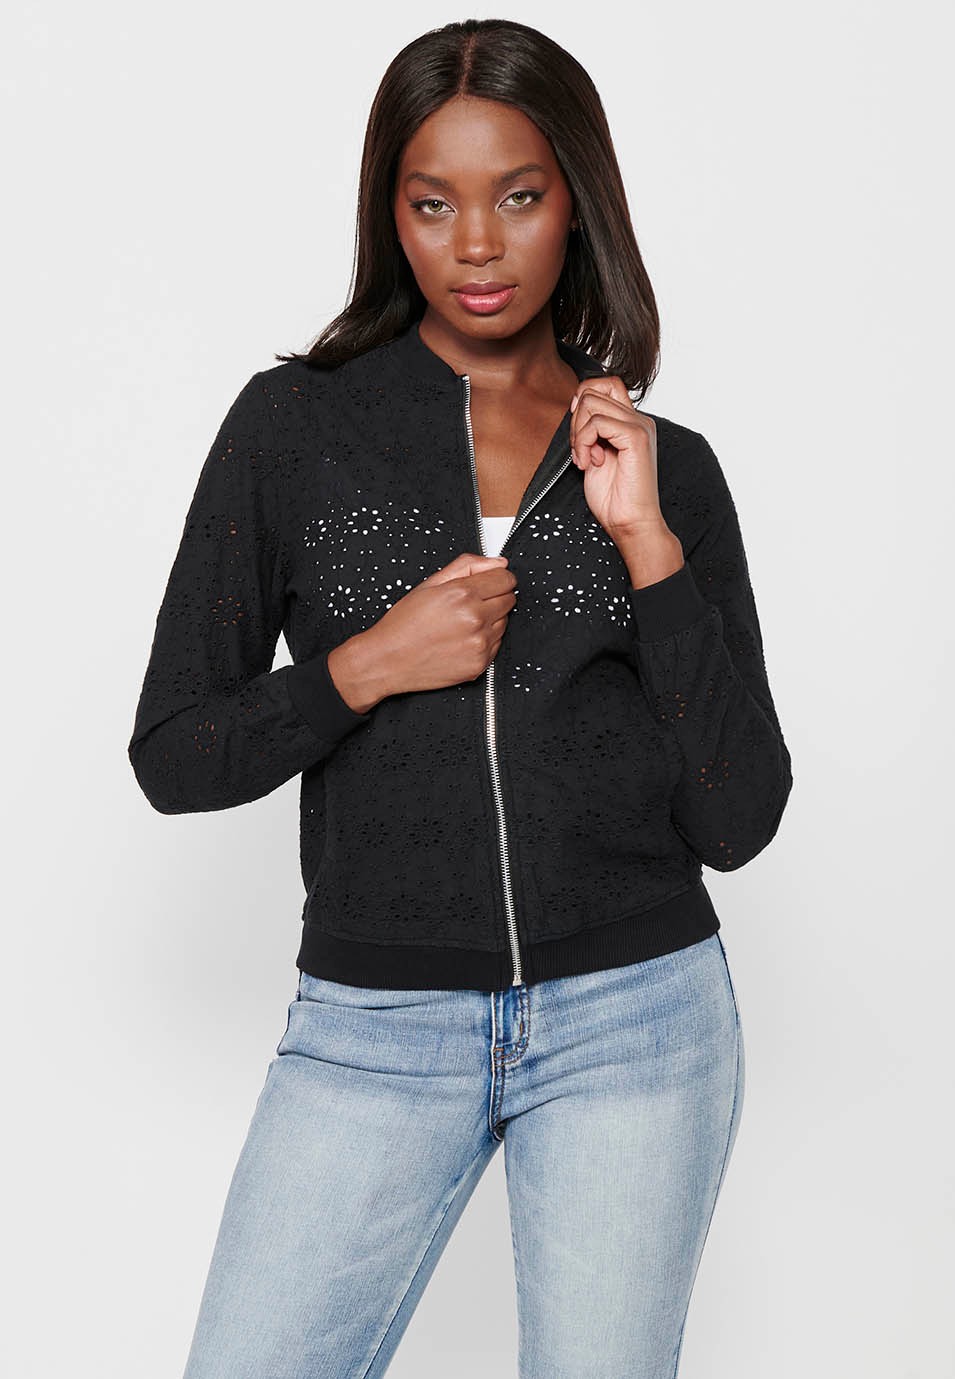 Cotton Sweatshirt with Zipper Front Closure and Rib Finishes with Embroidered Fabric with Floral Motifs and Black Round Neck for Women